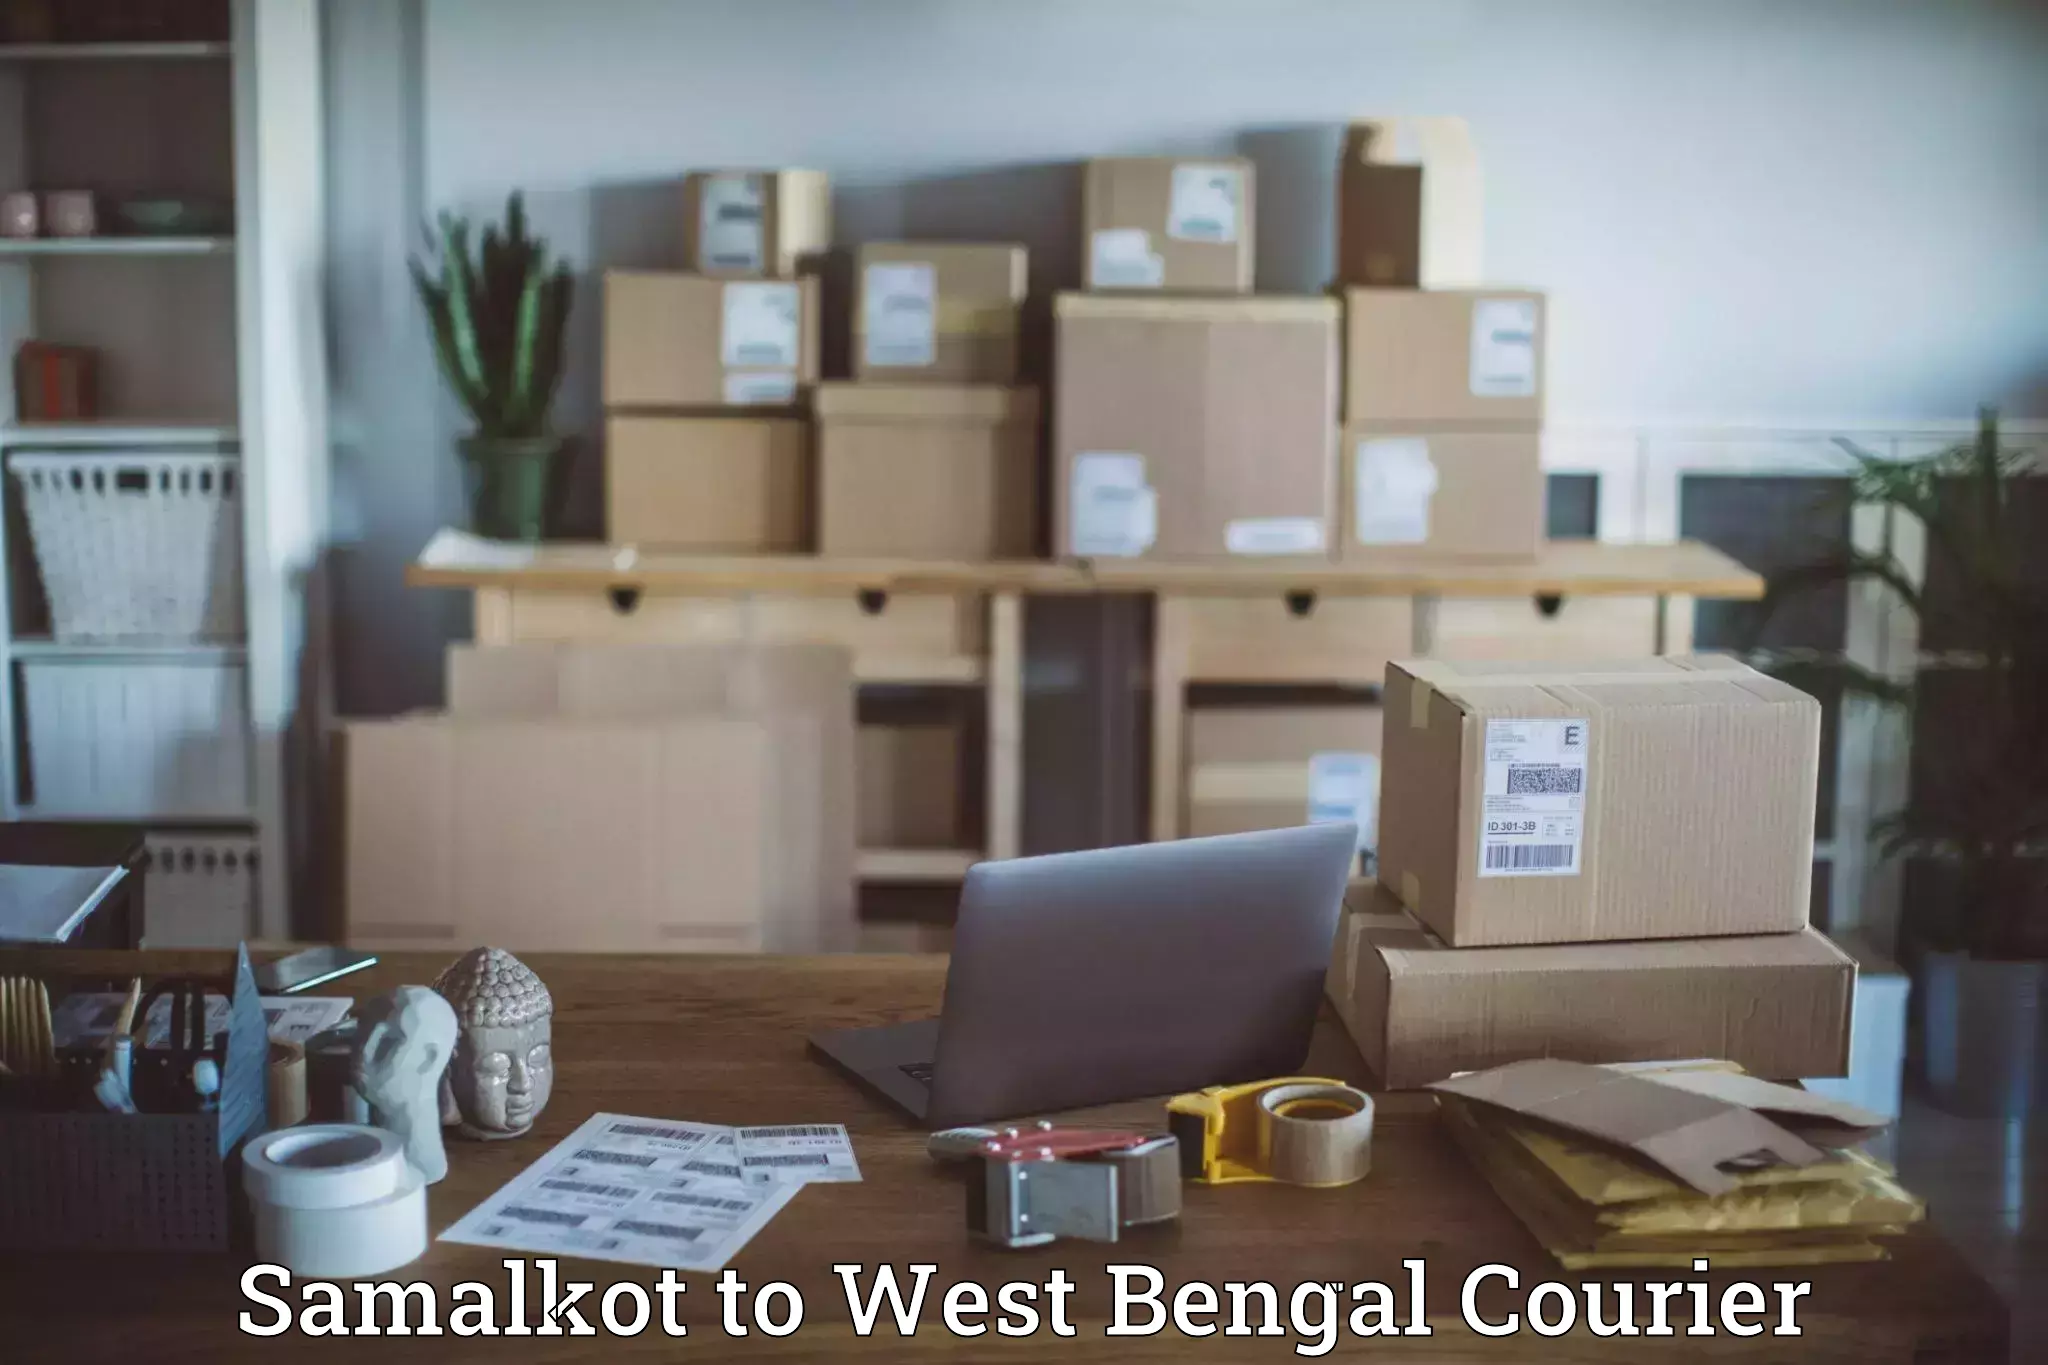 Courier service booking Samalkot to Raidighi